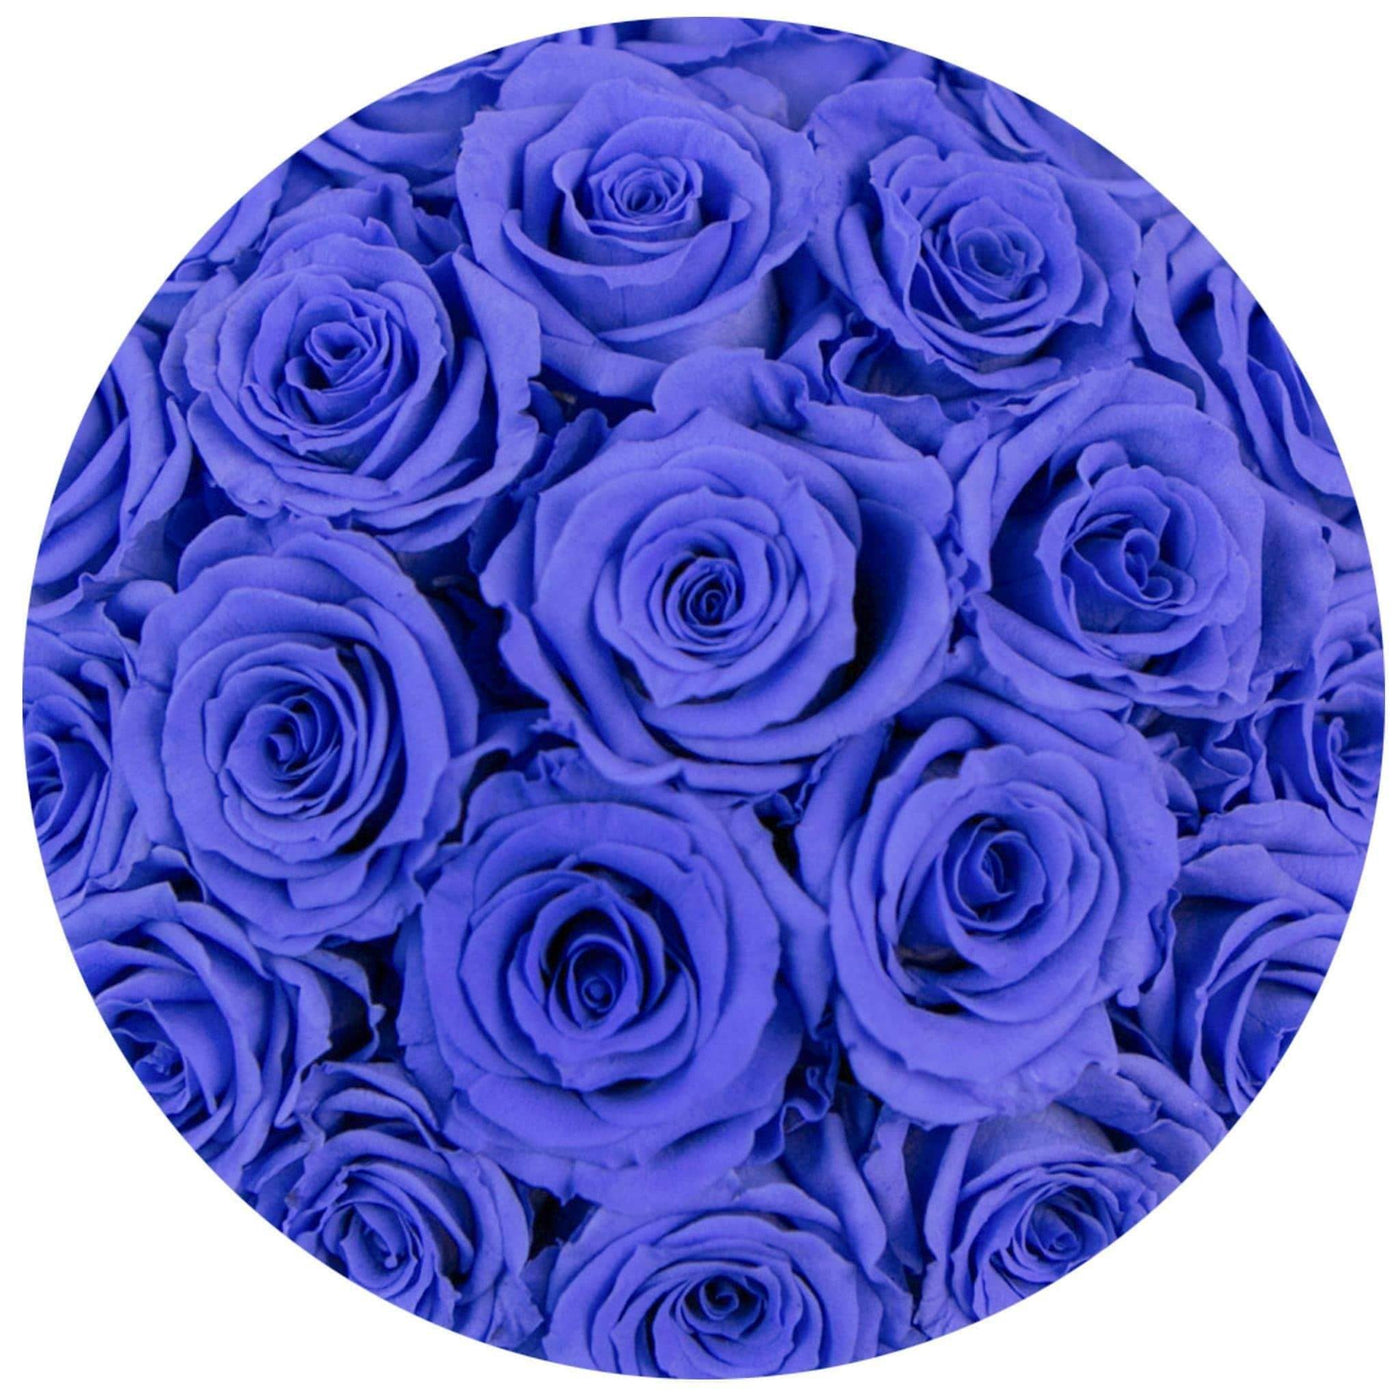 Violet Roses That Last A Year - Petite Rose Box